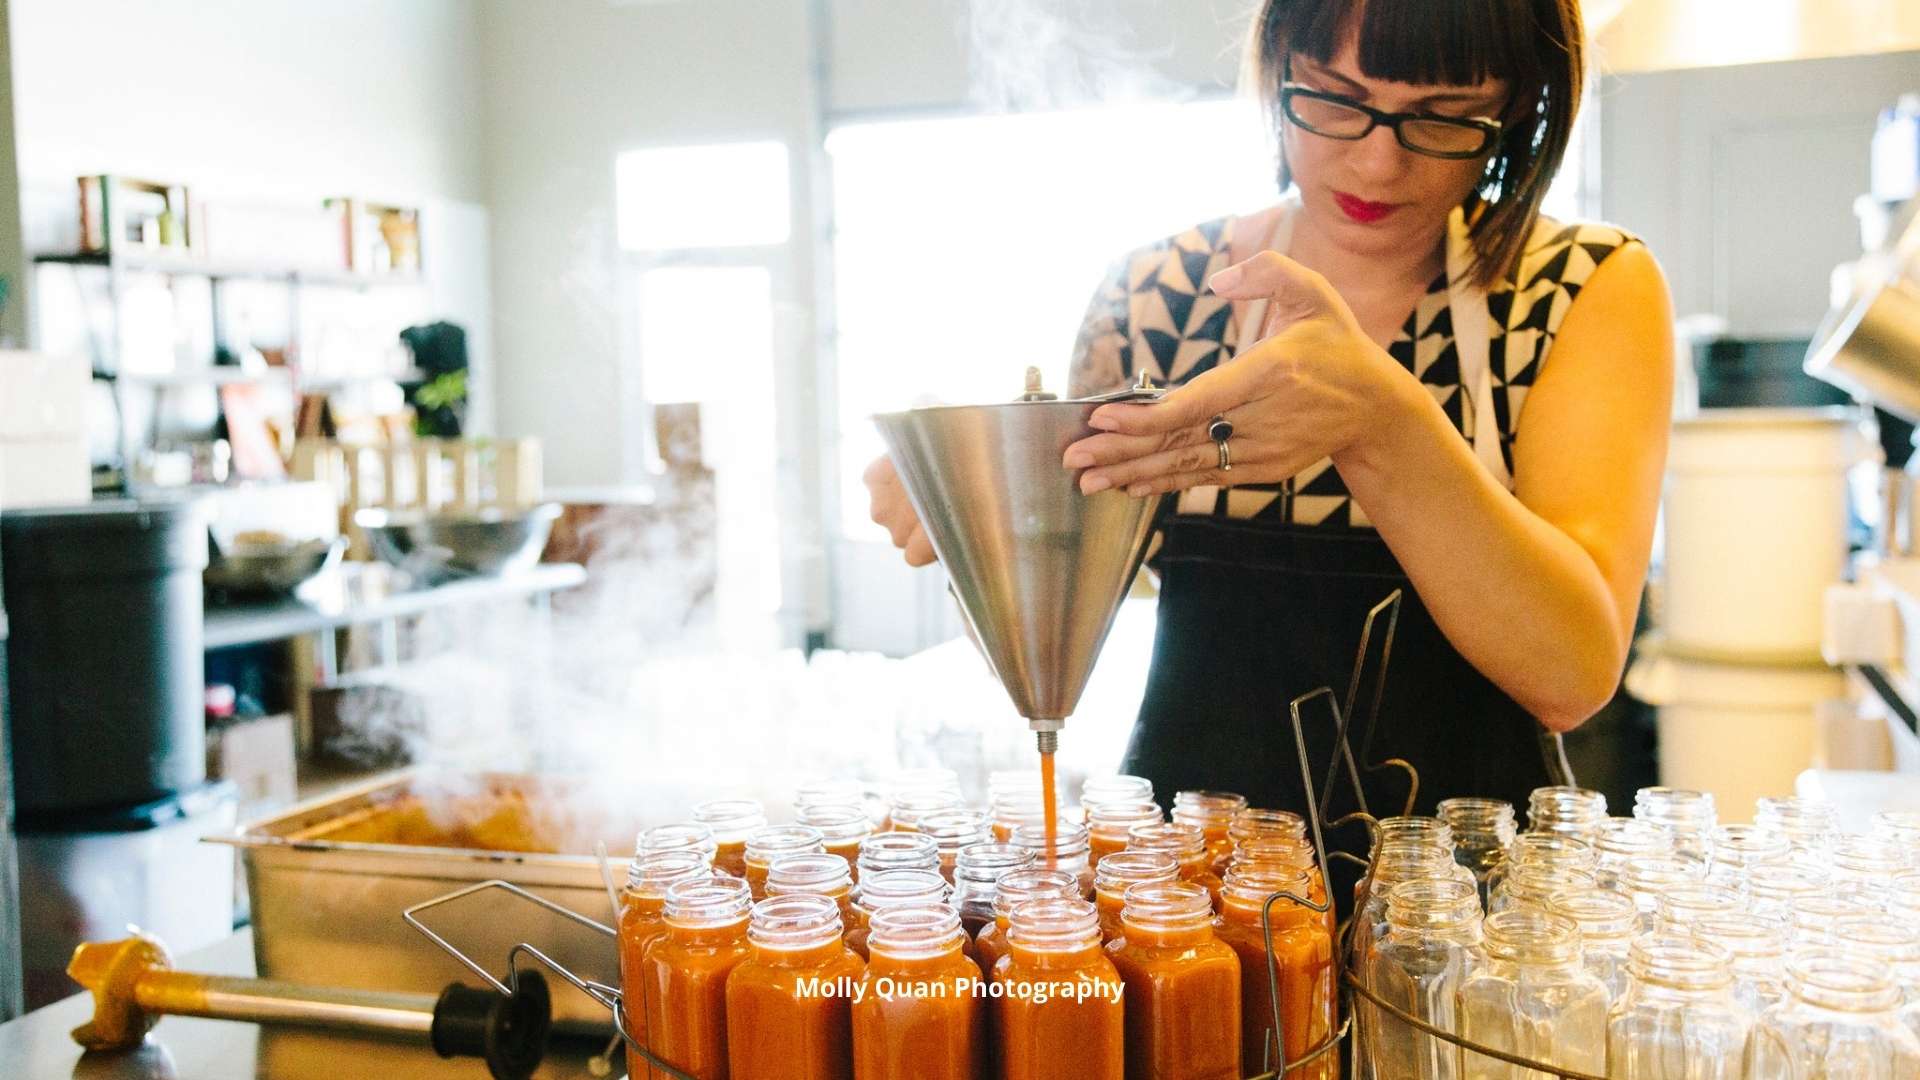 Sarah Marshall Filling Hot Sauce Bottles. Image by Molly Quan Photography.